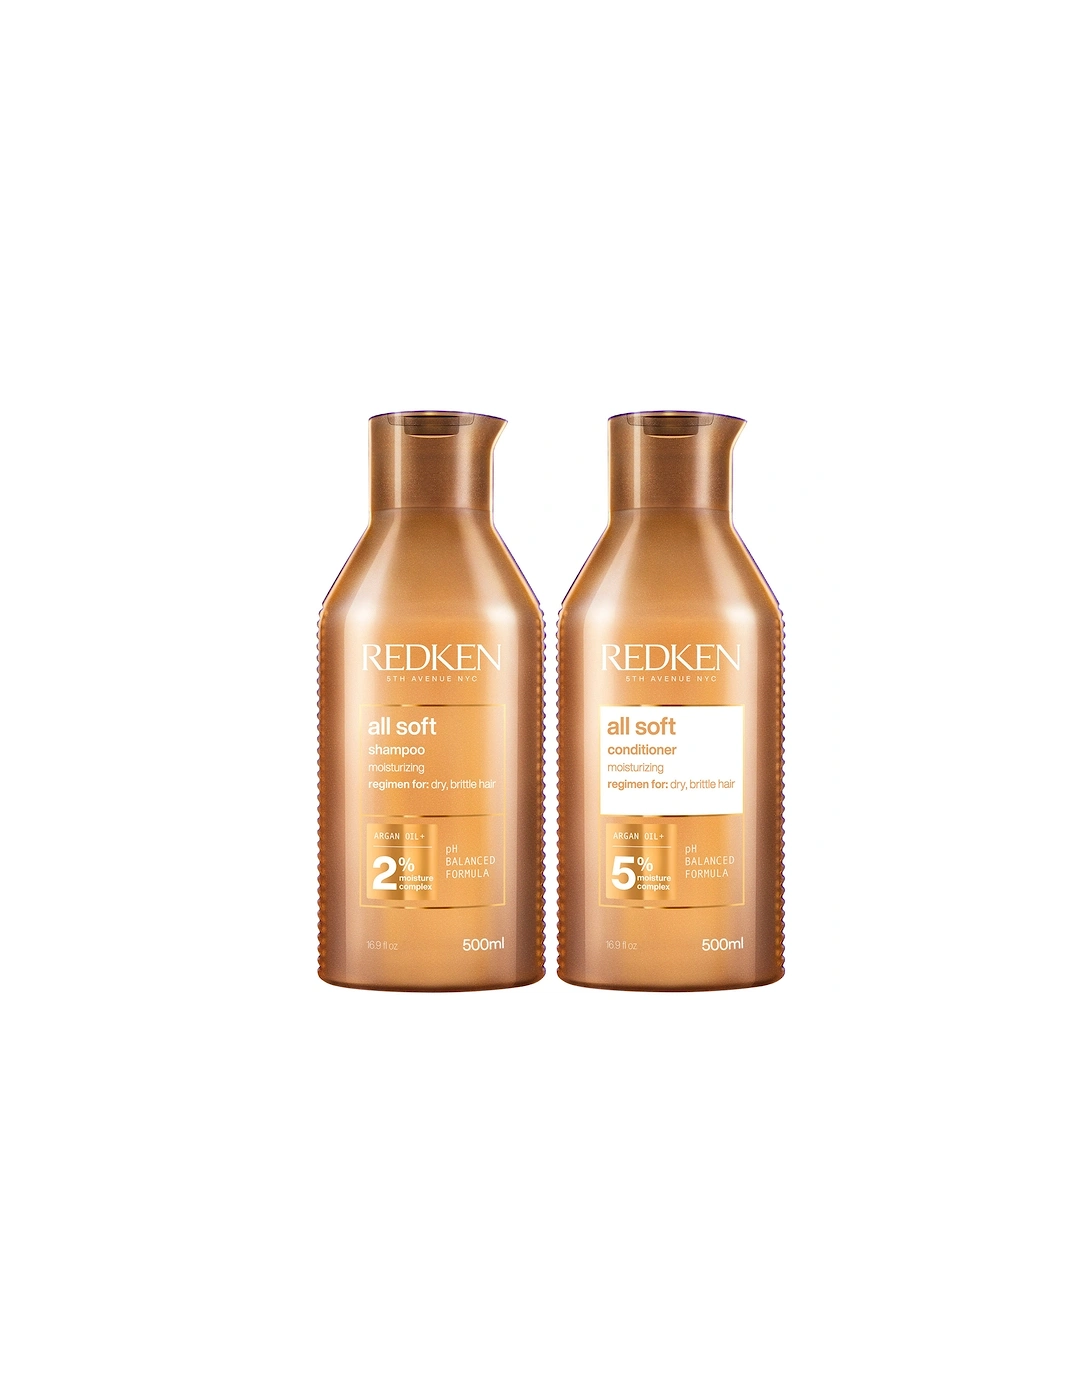 All Soft Shampoo and Conditioner Routine for Dry, Brittle Hair 500ml, 2 of 1